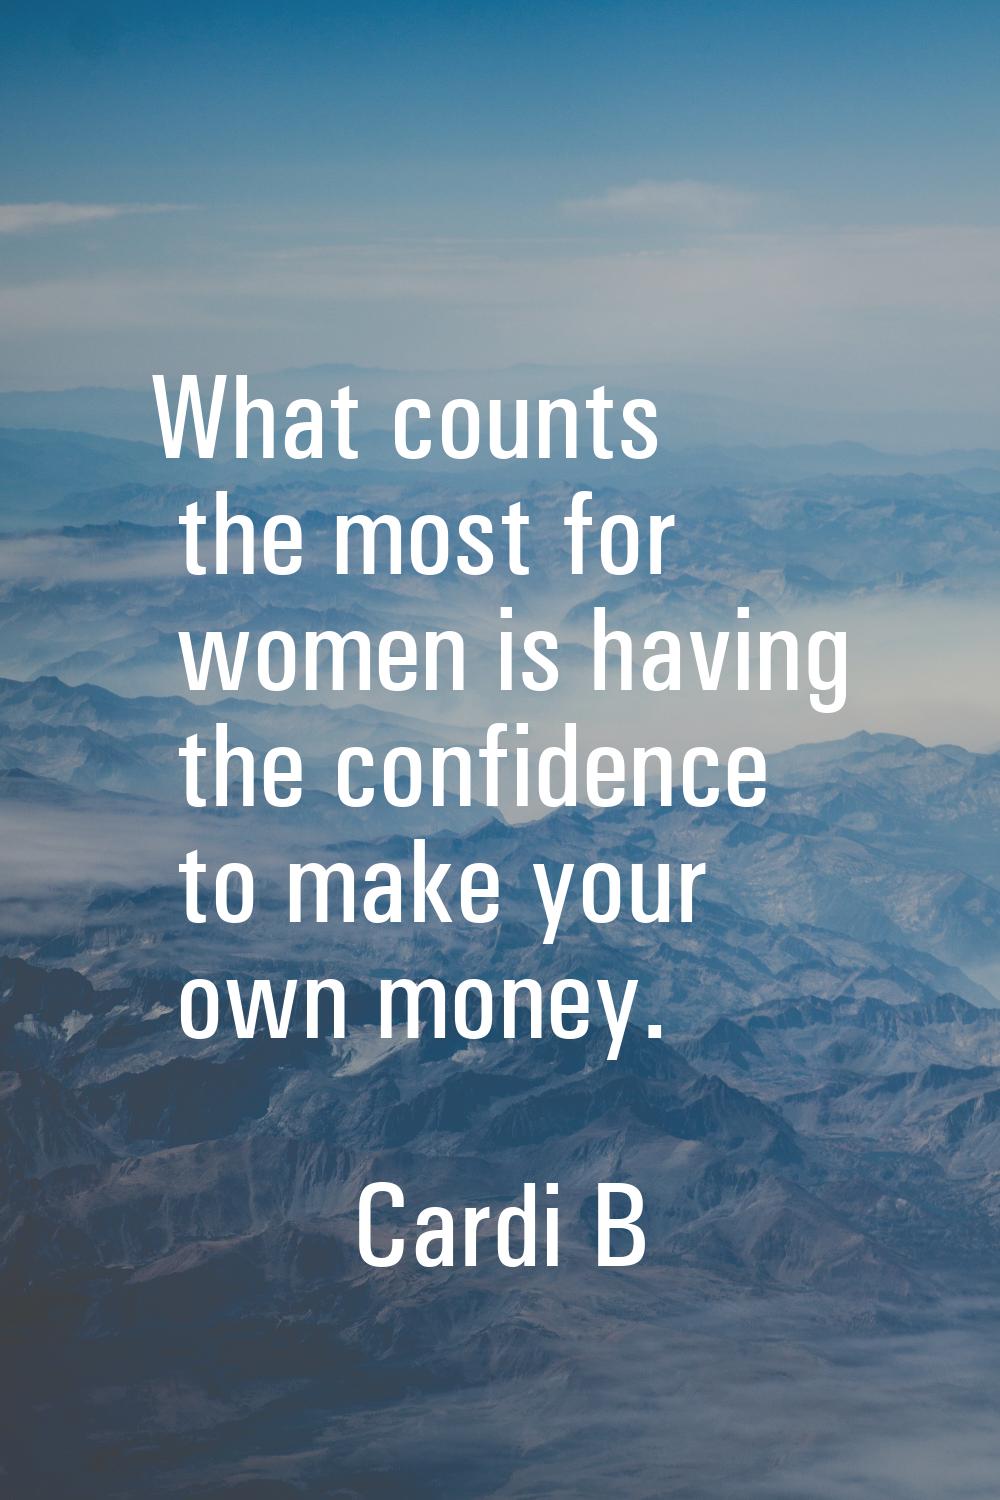 What counts the most for women is having the confidence to make your own money.